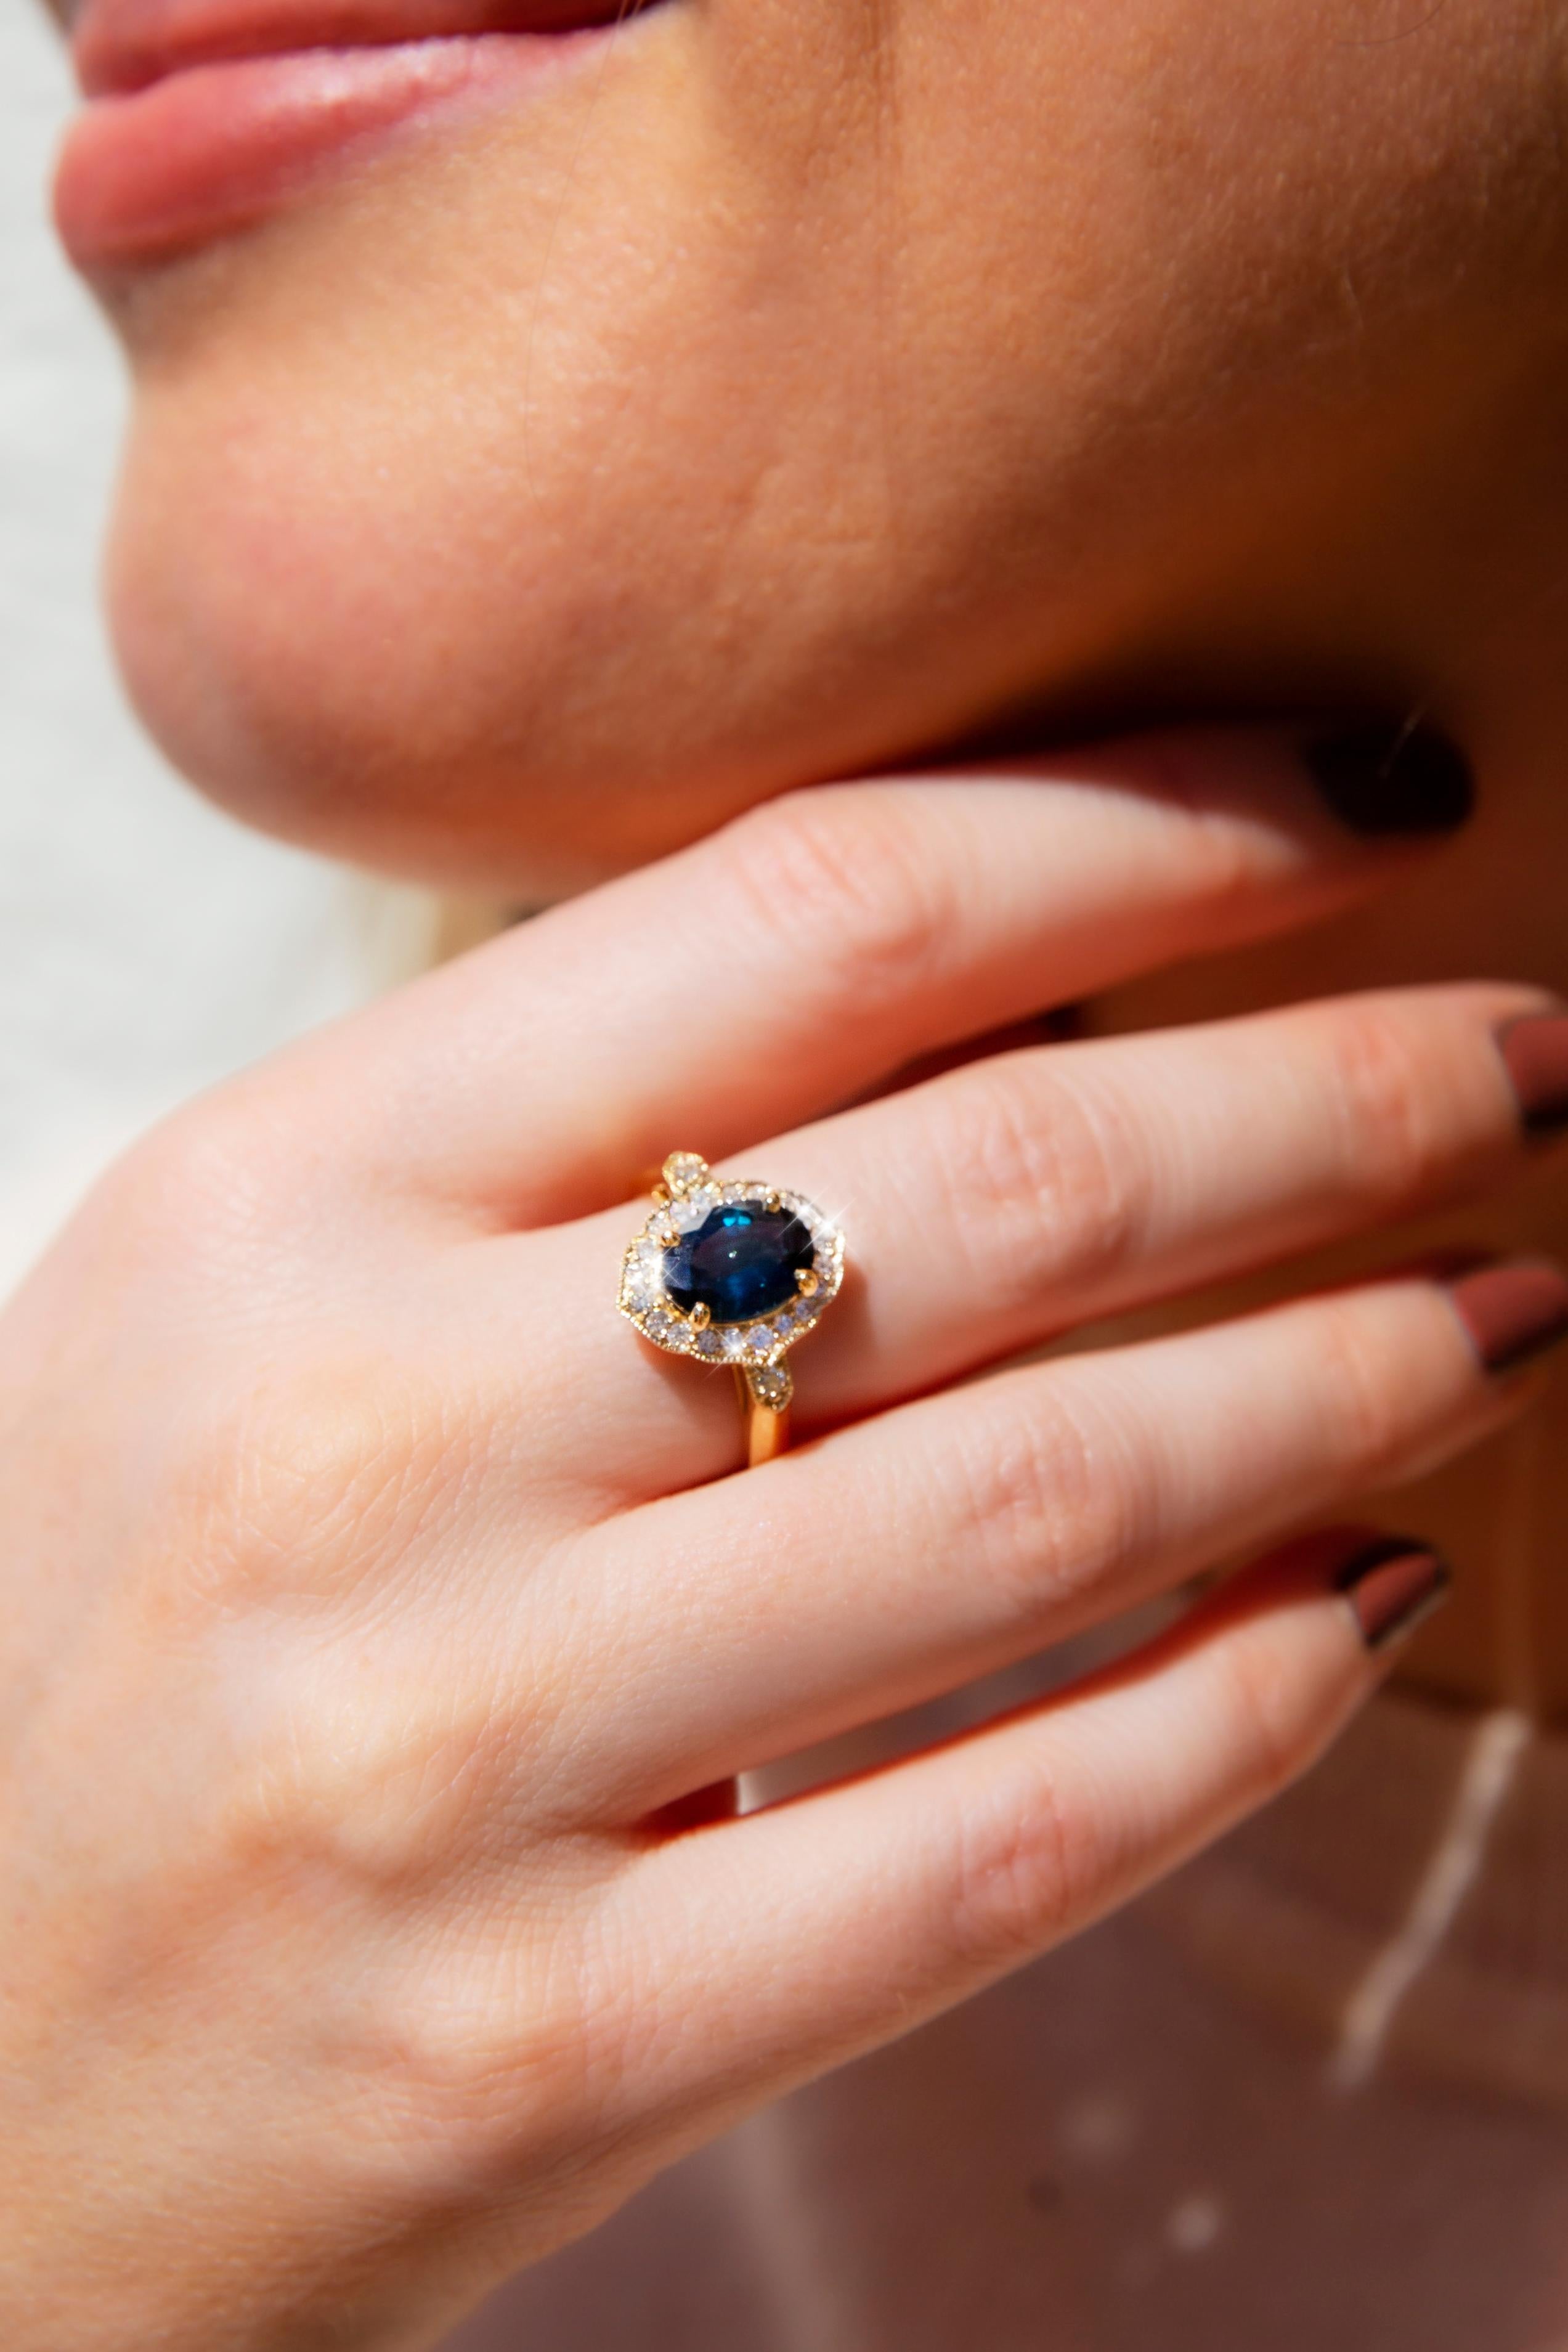 Crafted in 18 carat gold, this gorgeous contemporary ring features a decadent halo setting with an alluring oval Australian teal sapphire with a blue secondary colour, encompassed by a halo border of shimmering round brilliant cut diamonds. The